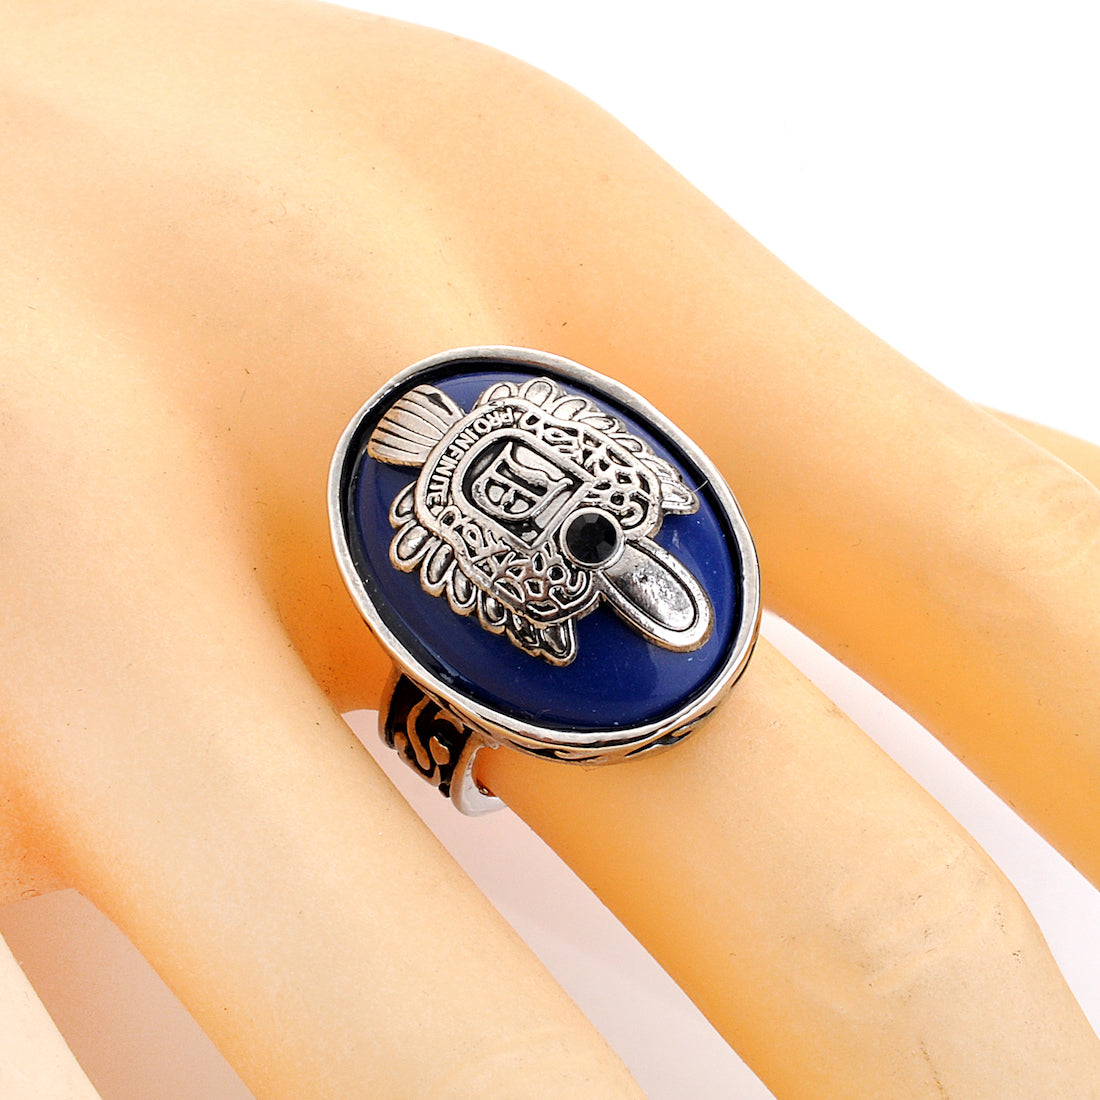 1 pc The Vampire Diaries Rings Elena Gilbert Daylight Rings Vintage Crystal  Ring With Blue Lapis FashionJewelry Movies Cosplay - AliExpress